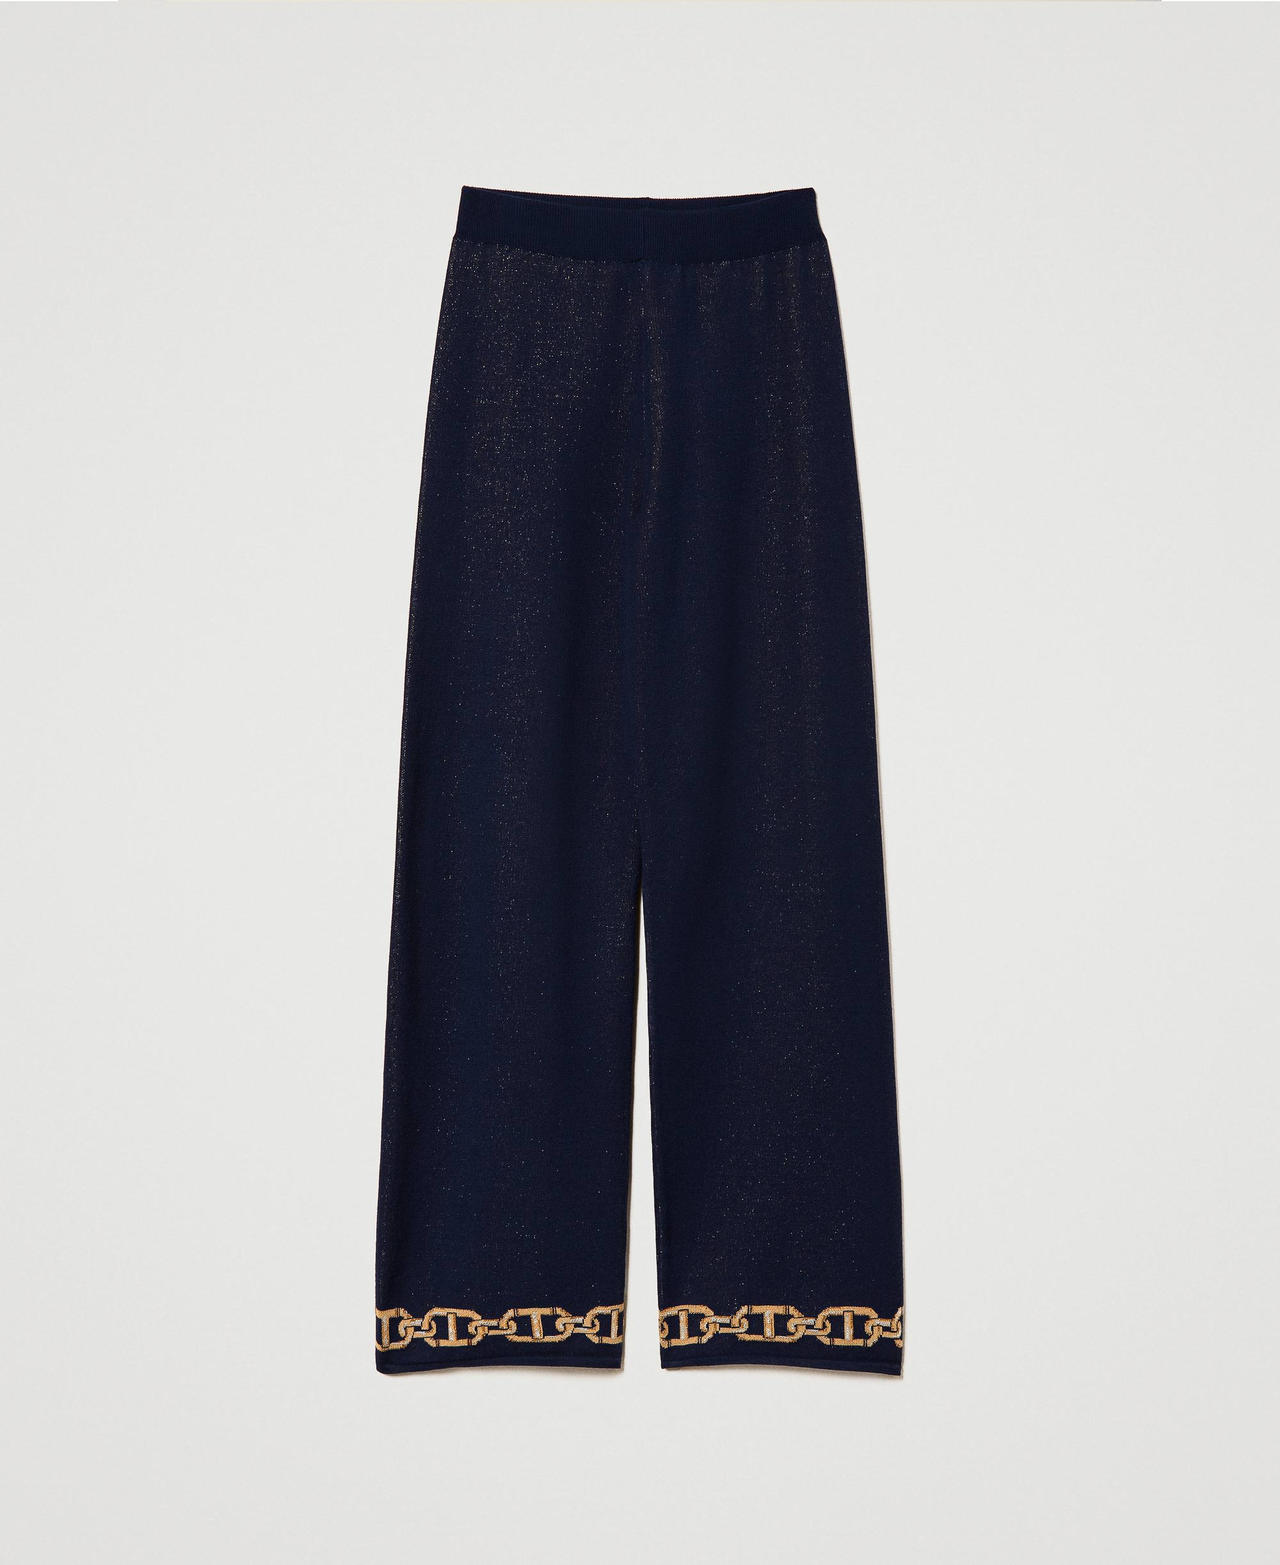 Jacquard knit trousers with chains Mid Blue and Lurex Chains Jacquard Woman 241TP3521-0S